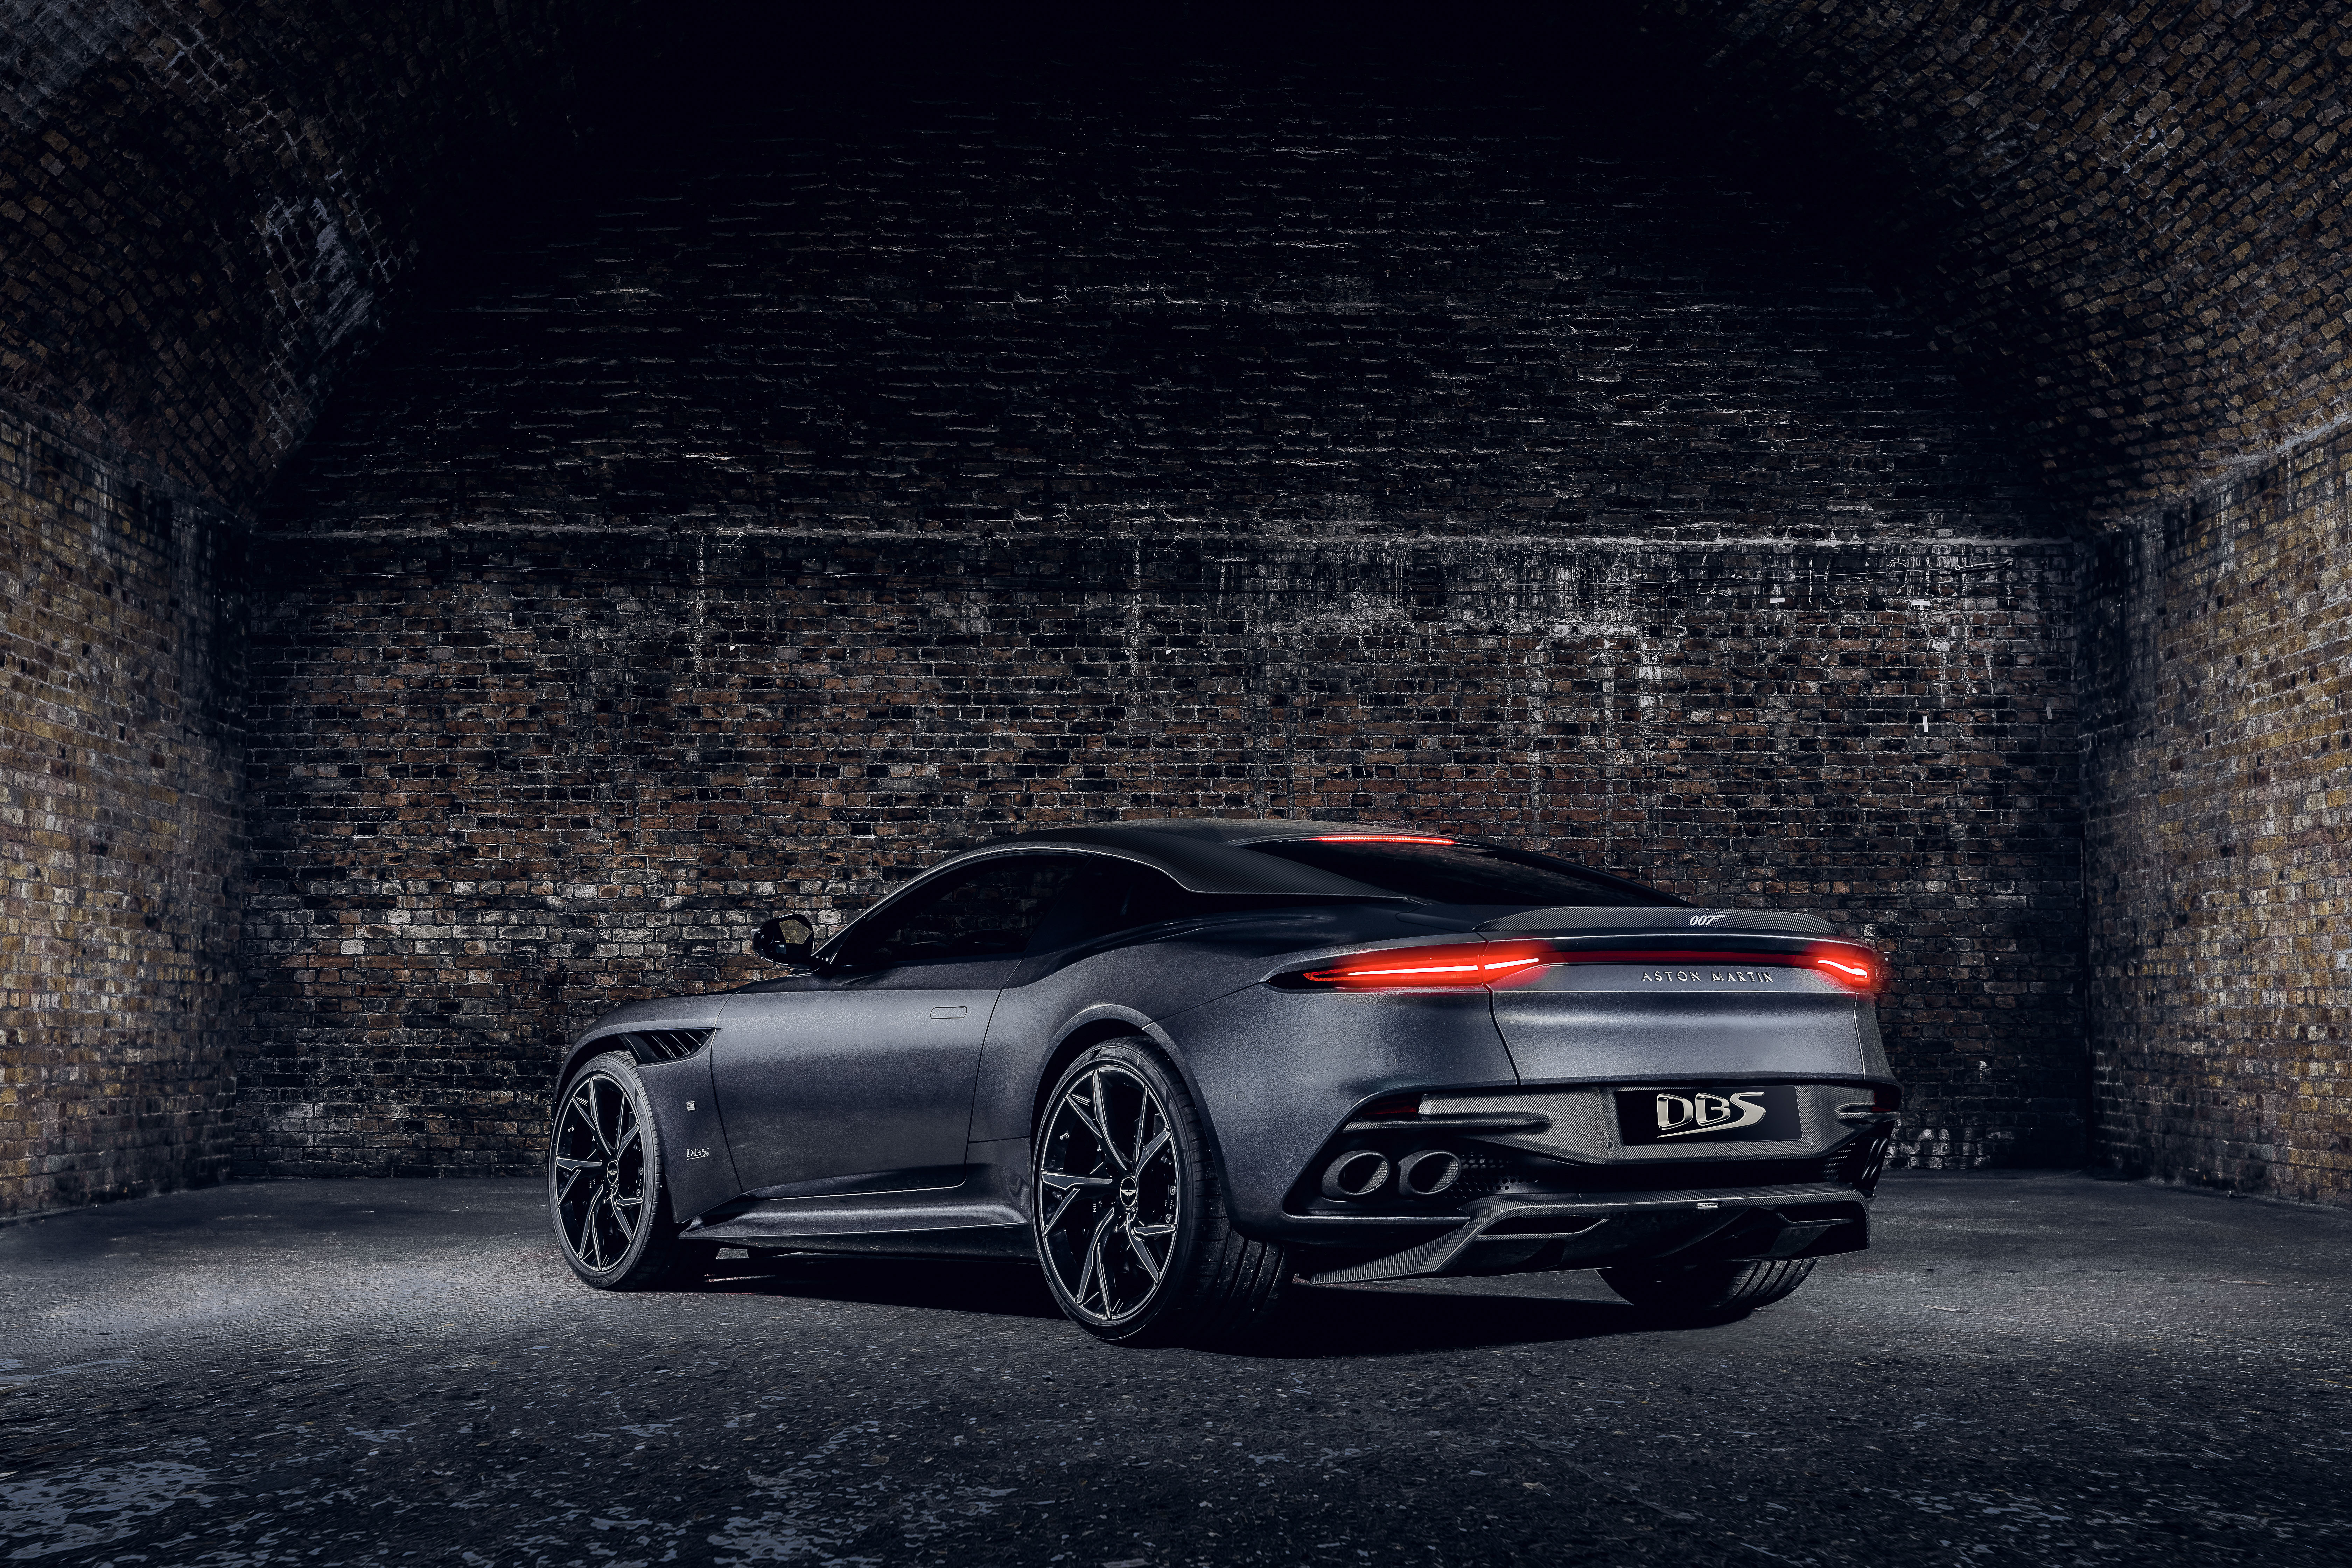 Aston Martin Dbs Superleggera 007 Edition, HD Cars, 4k Wallpapers, Images,  Backgrounds, Photos and Pictures